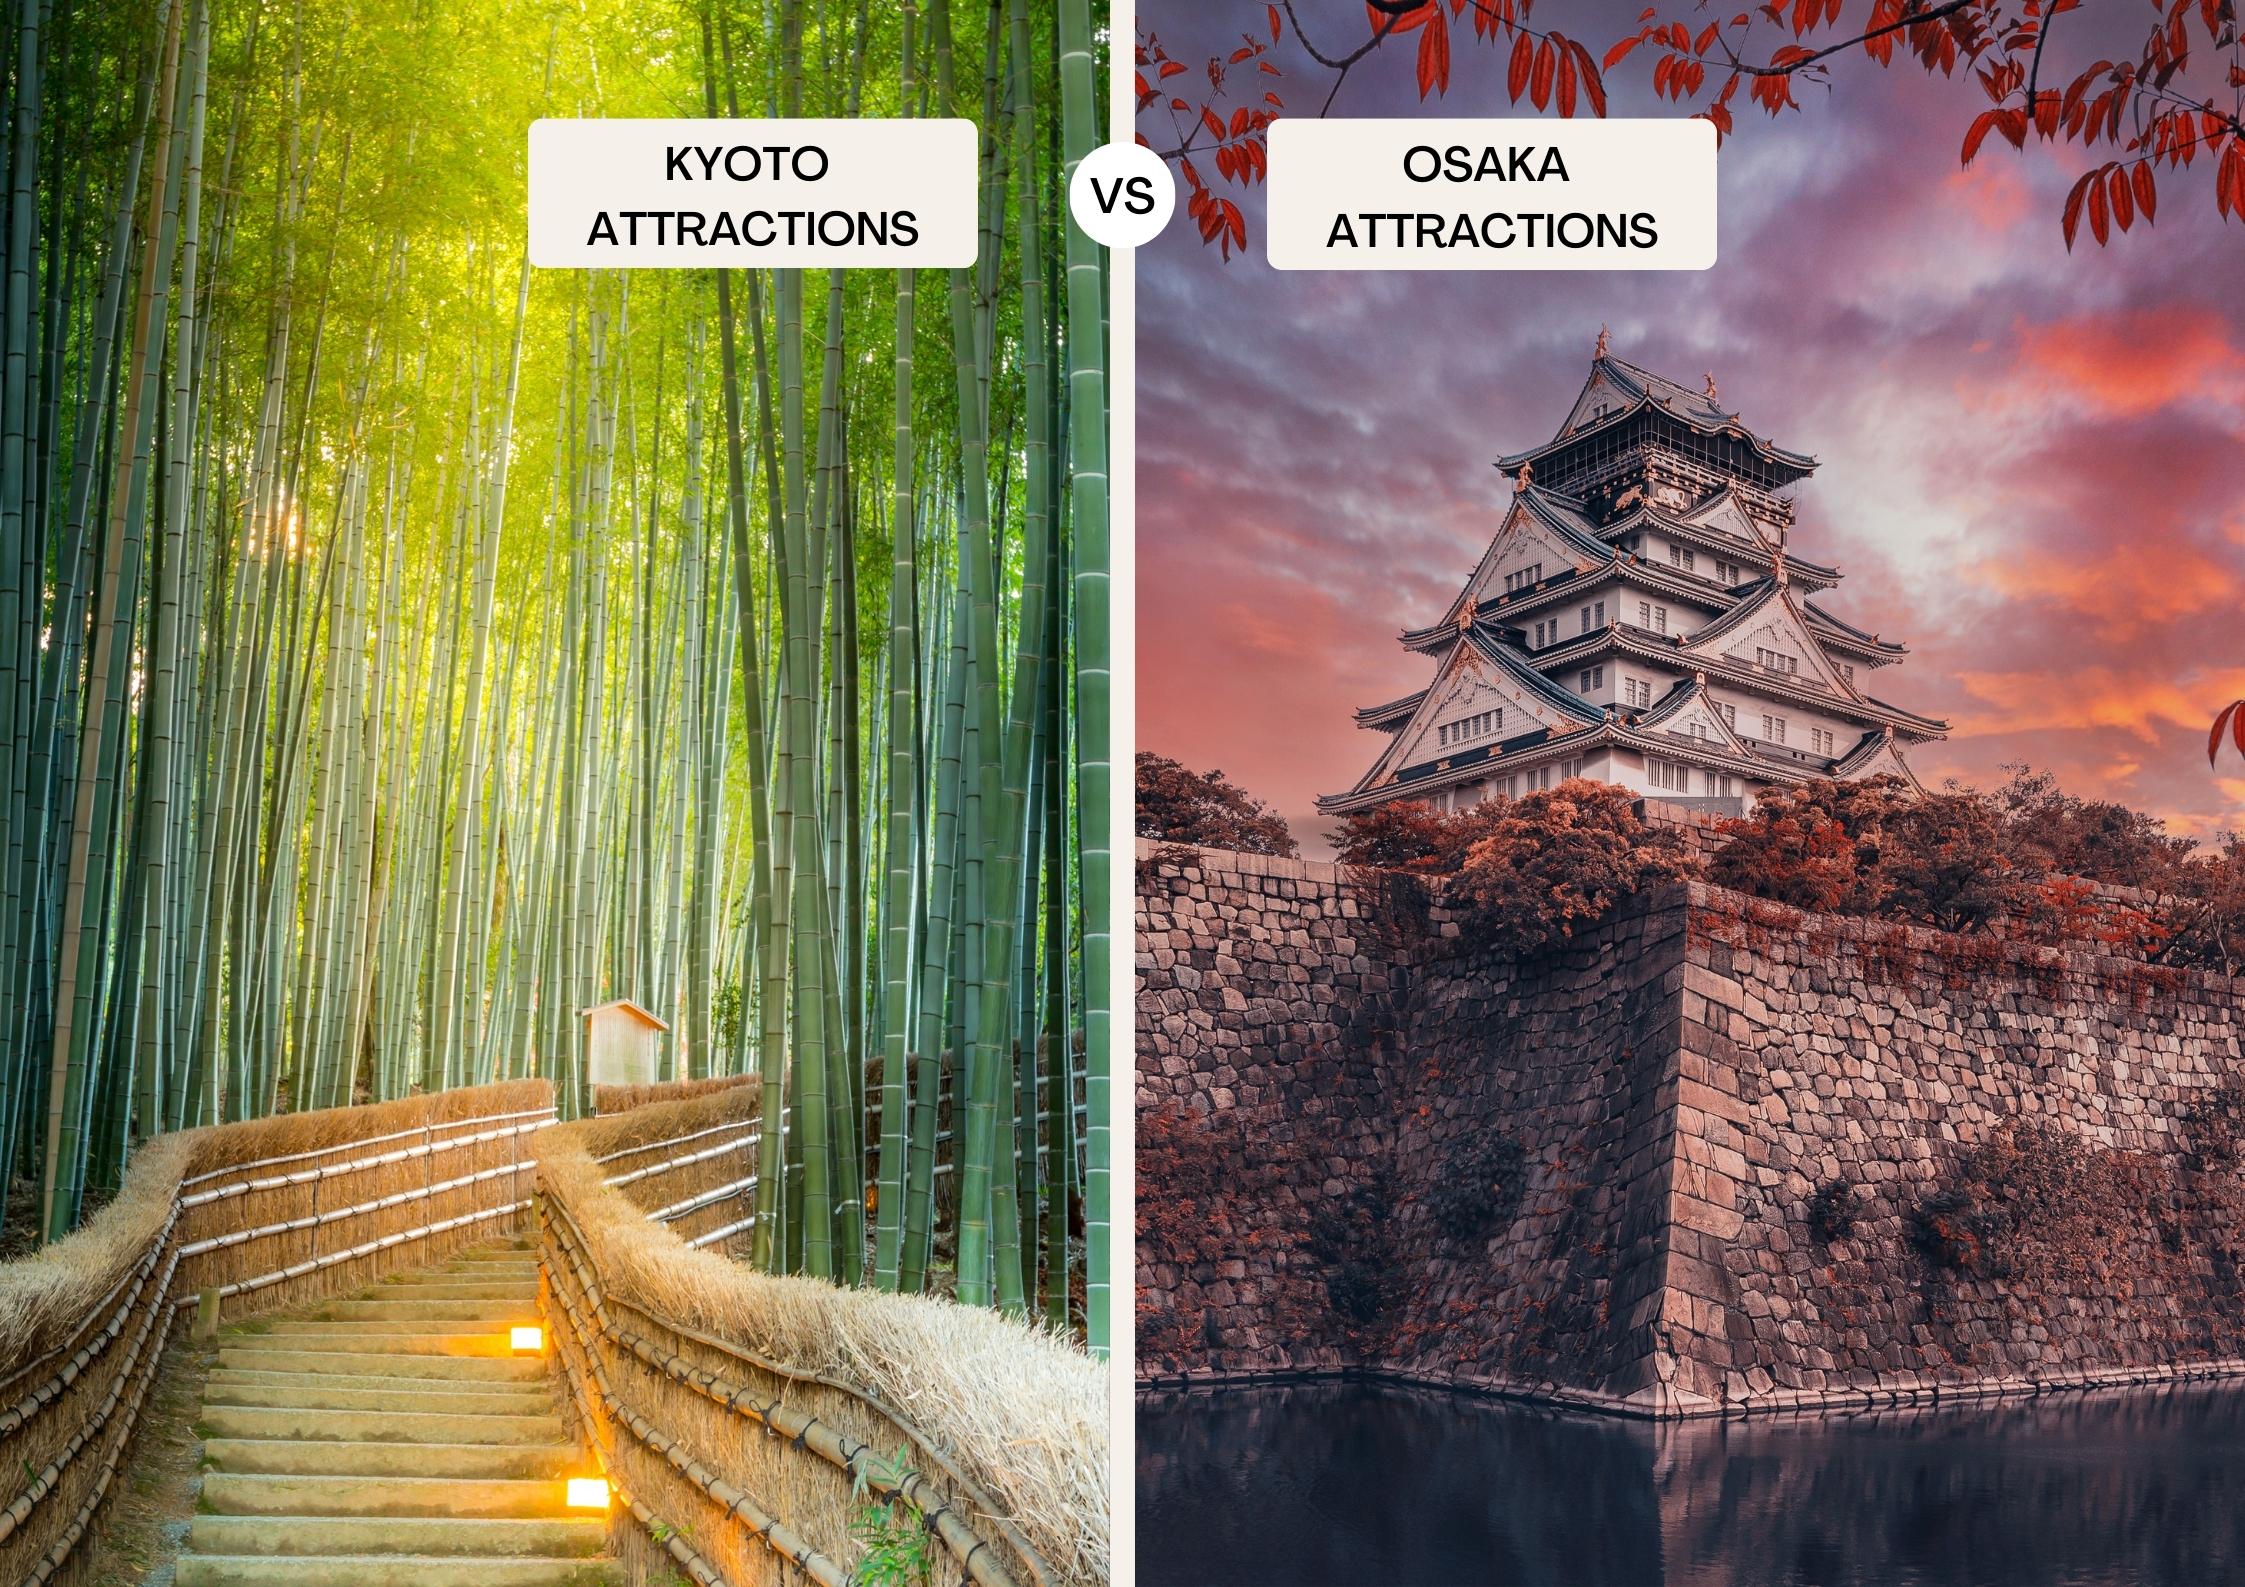 Kyoto or Osaka for tourist attractions